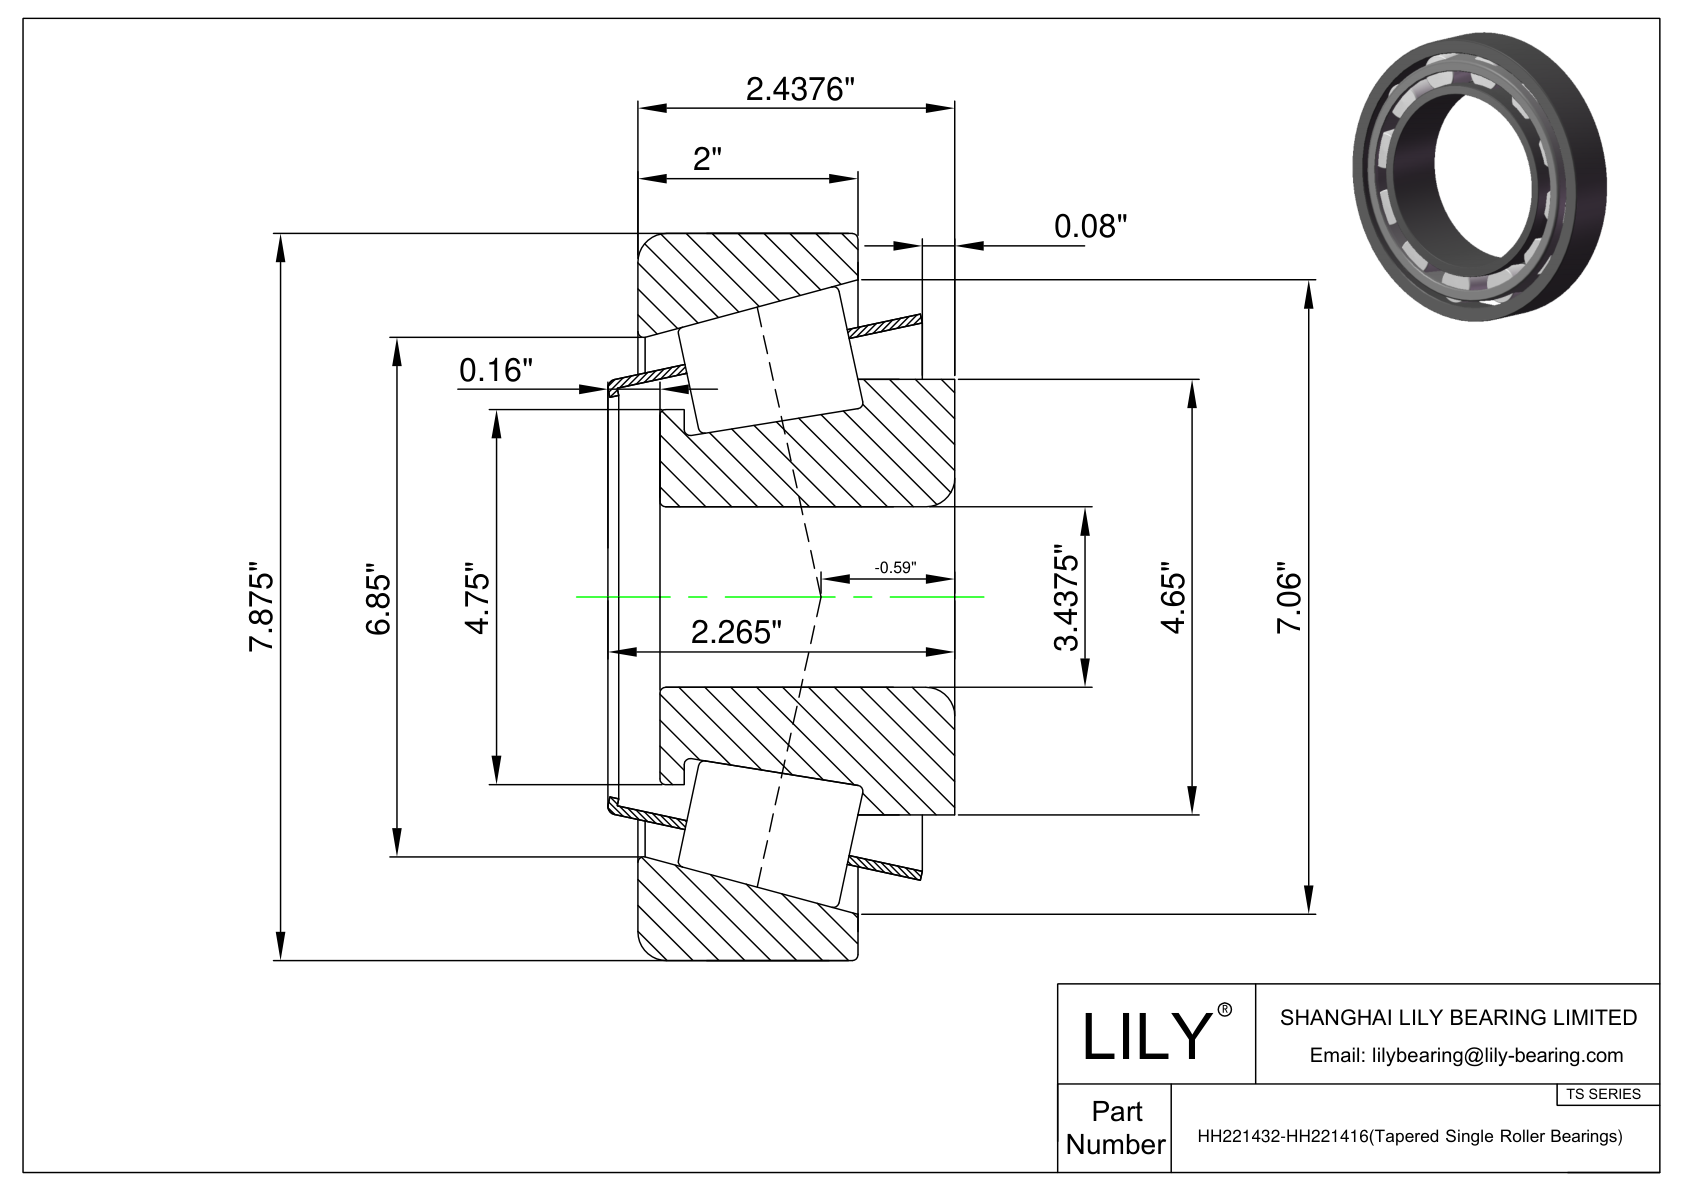 HH221432-HH221416 TS (Tapered Single Roller Bearings) (Imperial) cad drawing